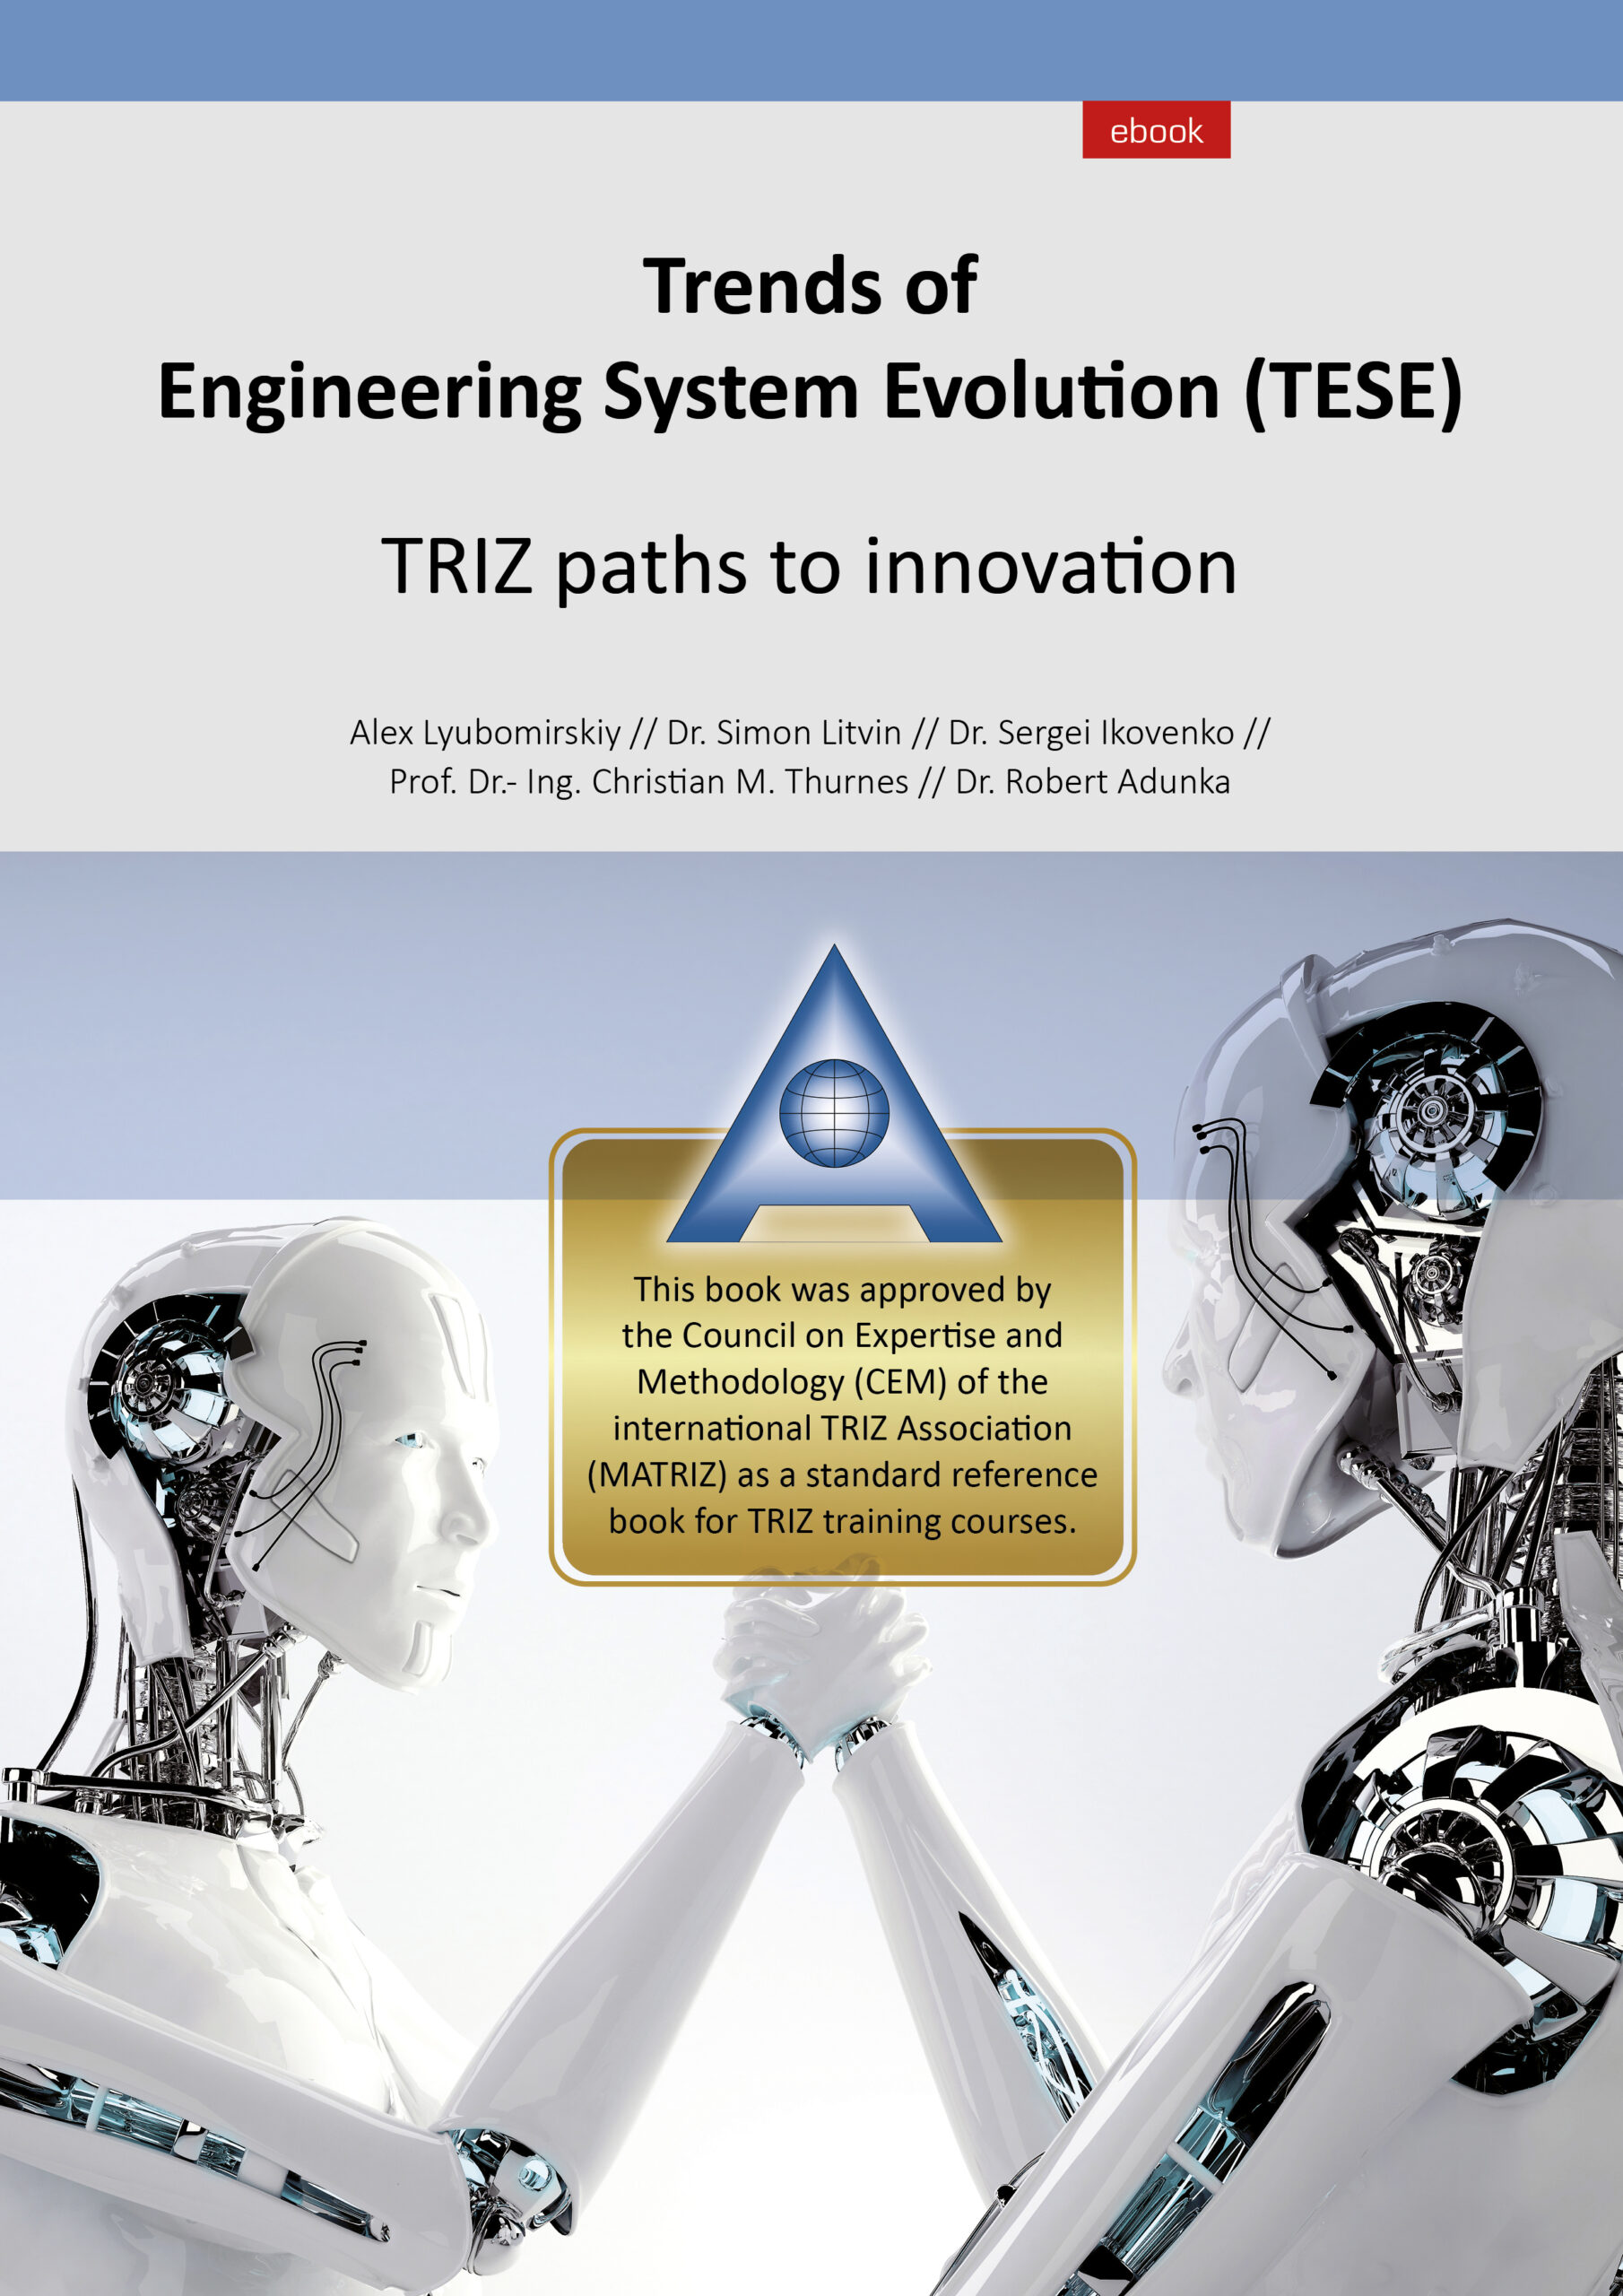 Trends of Engineering System Evolution (TESE): TRIZ paths to innovation - Kindle ebook version cover image